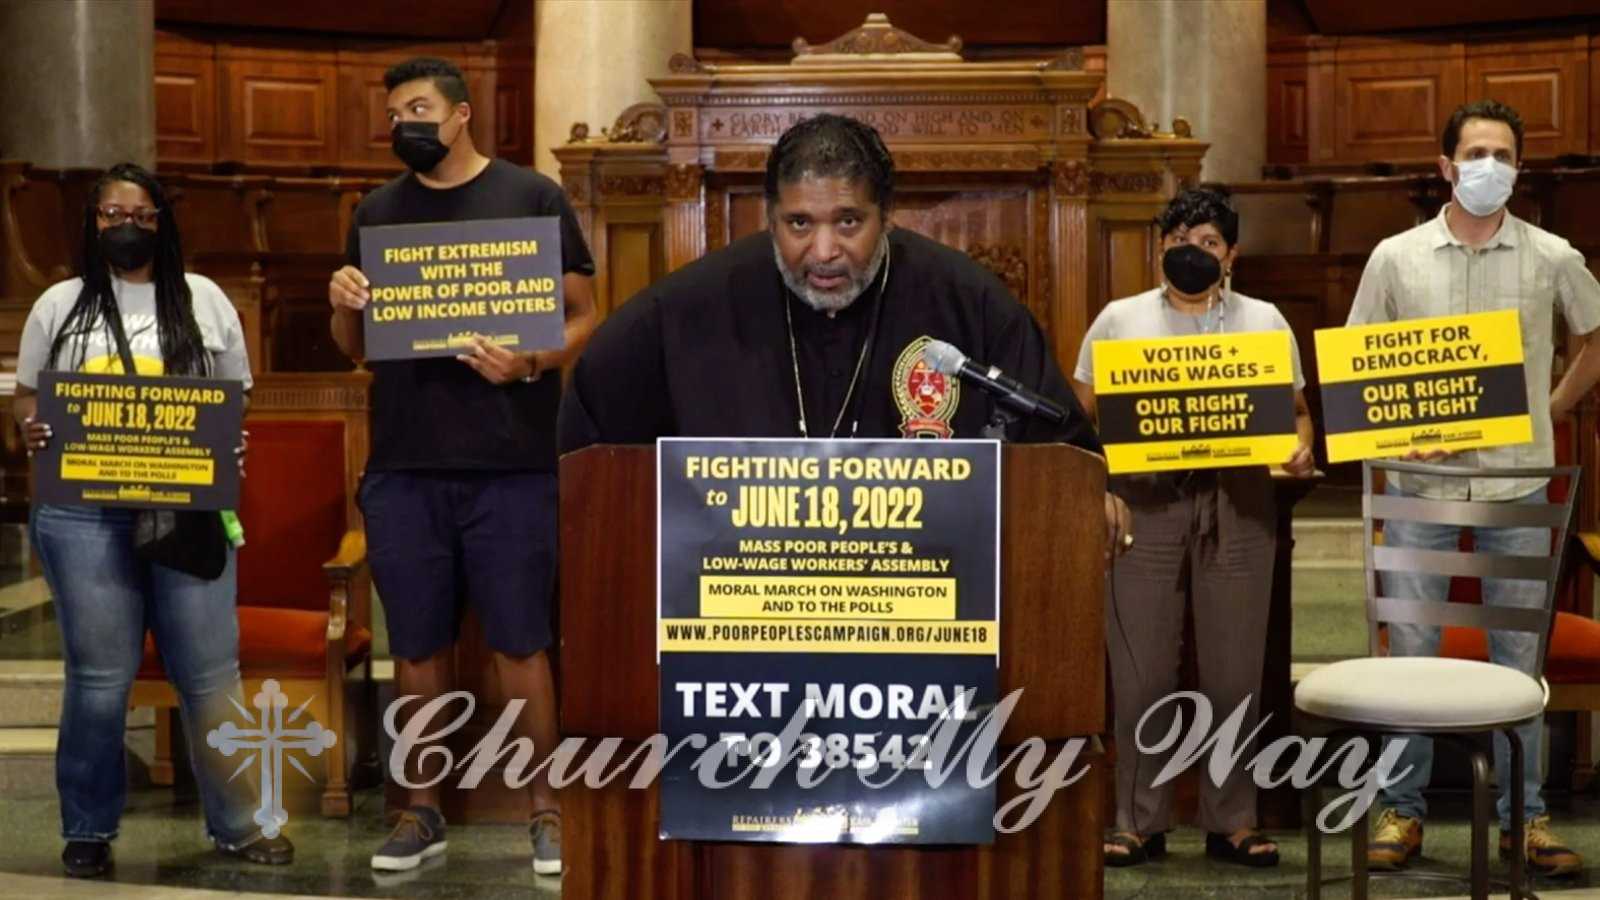 The Rev. William Barber speaks at National City Christian Church in downtown Washington, D.C., on Monday, June 6, 2022. Video screen grab